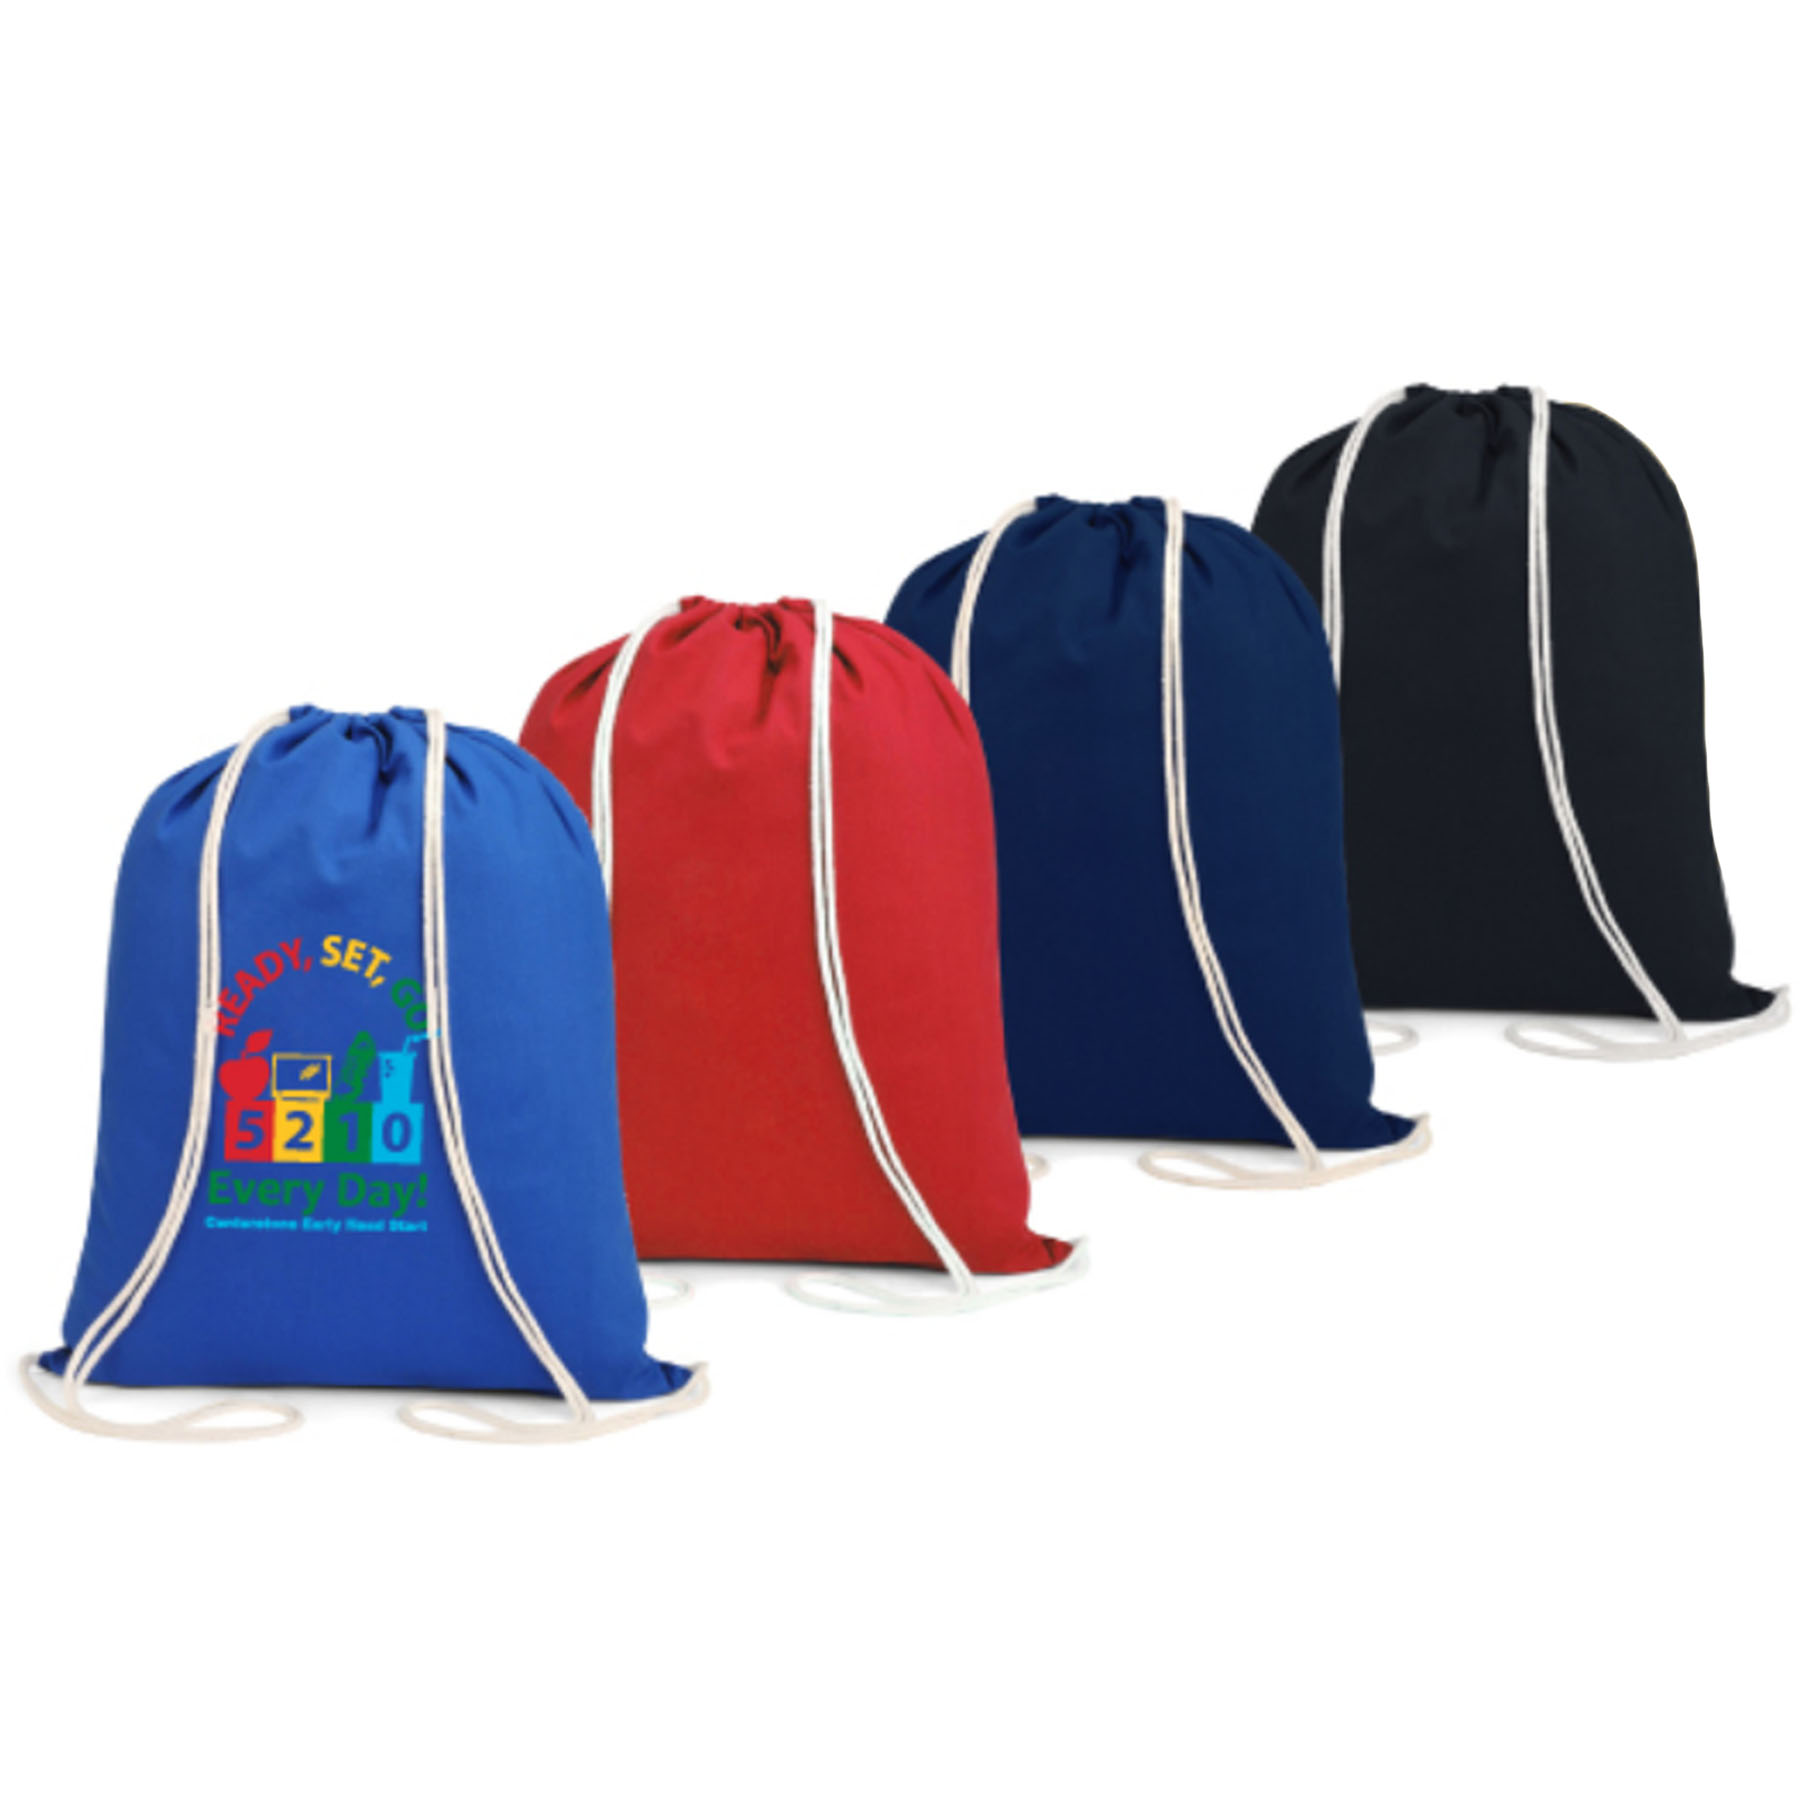 Colored Promo Drawstring Backpack